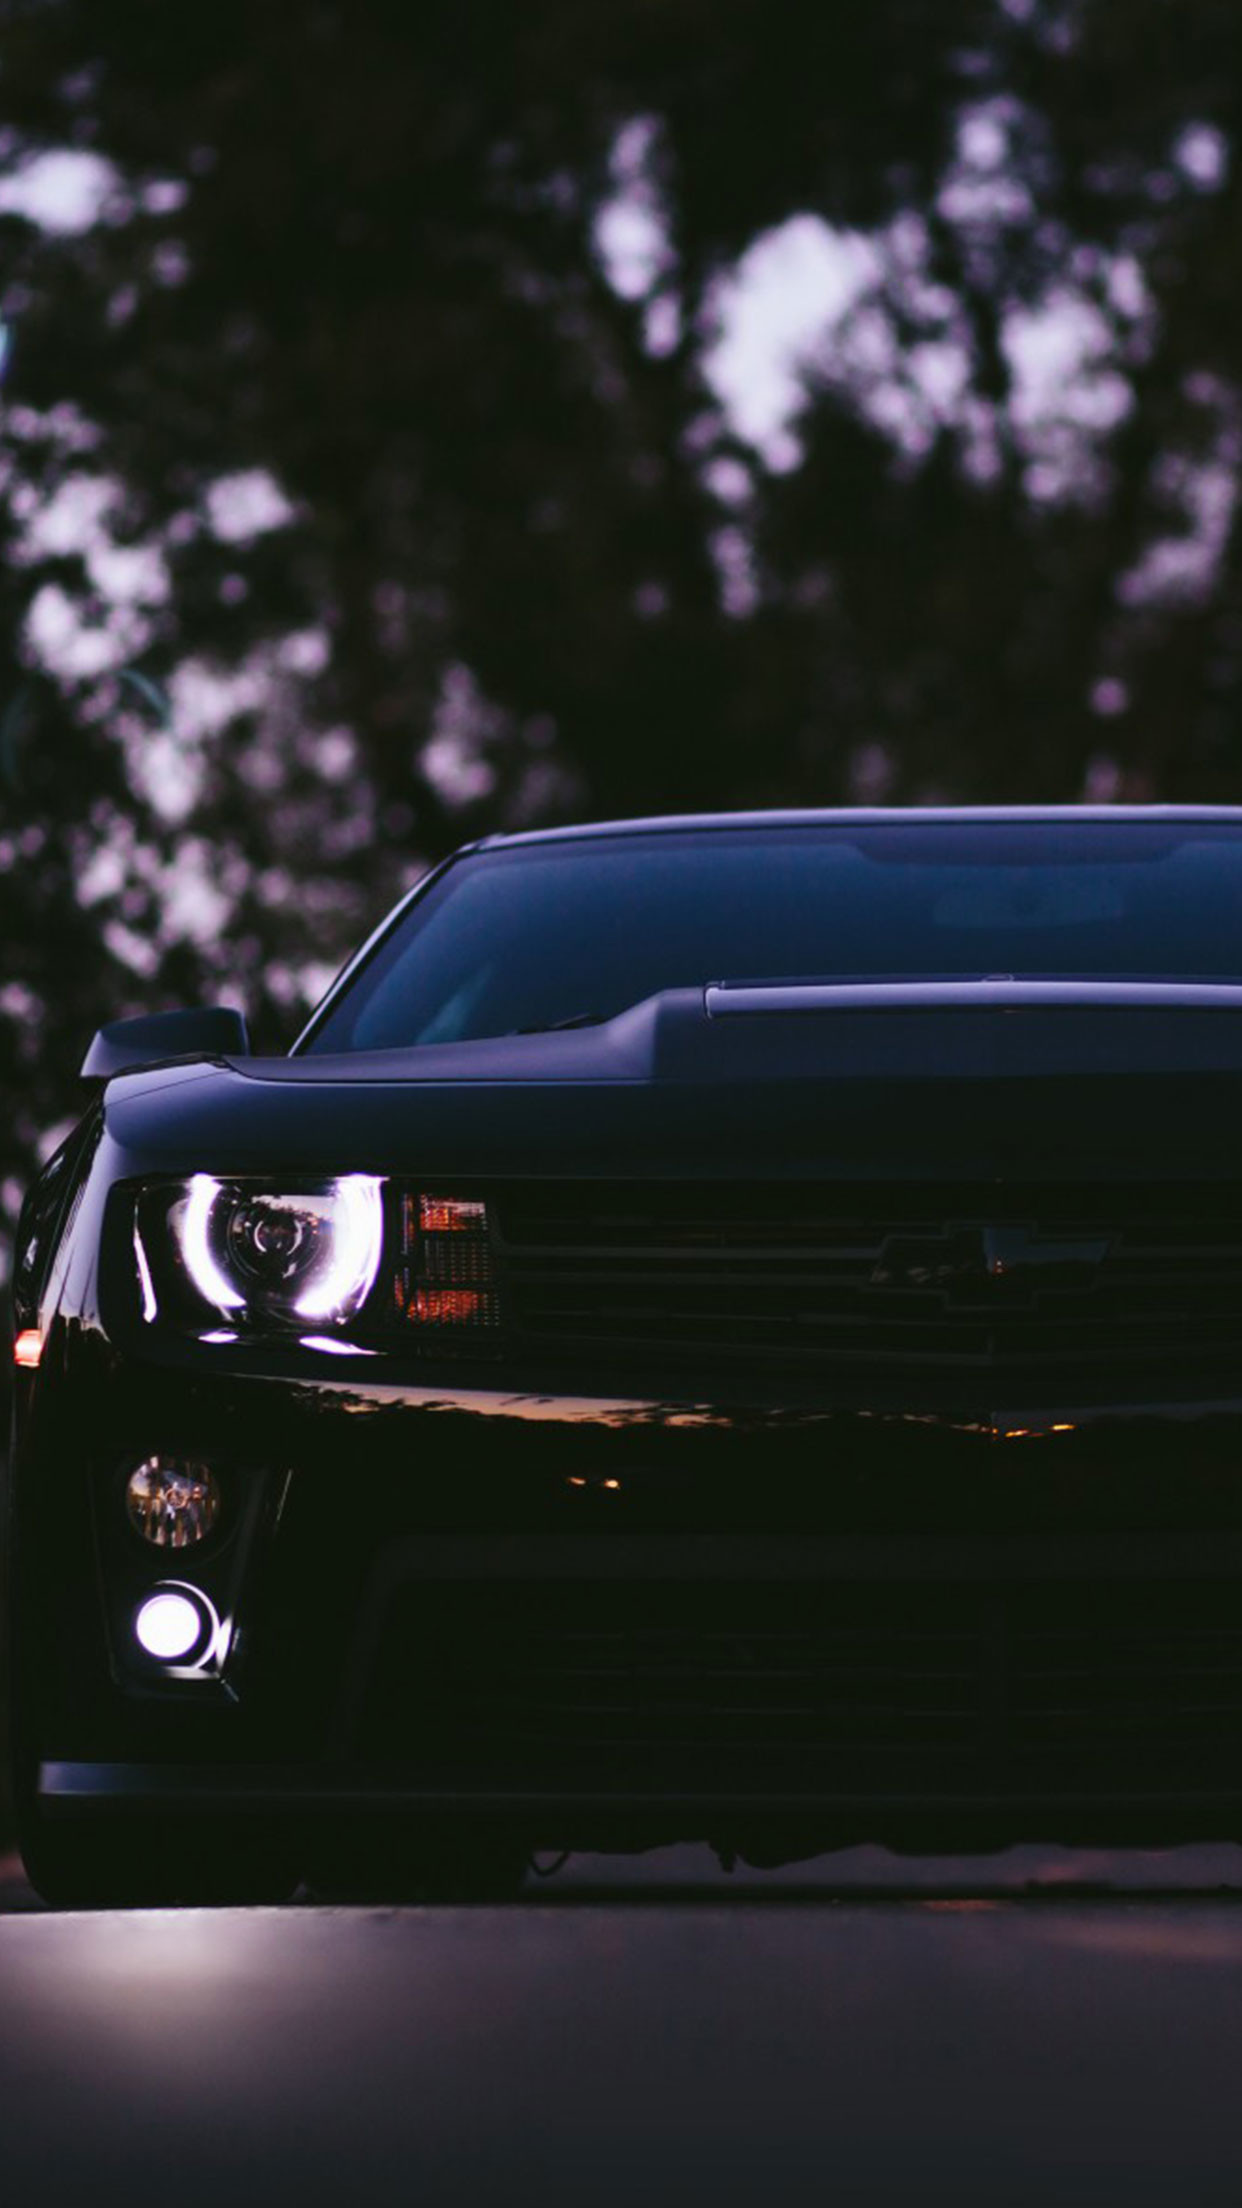 Black Camaro SS car wallpaper for #Iphone and #Android at 